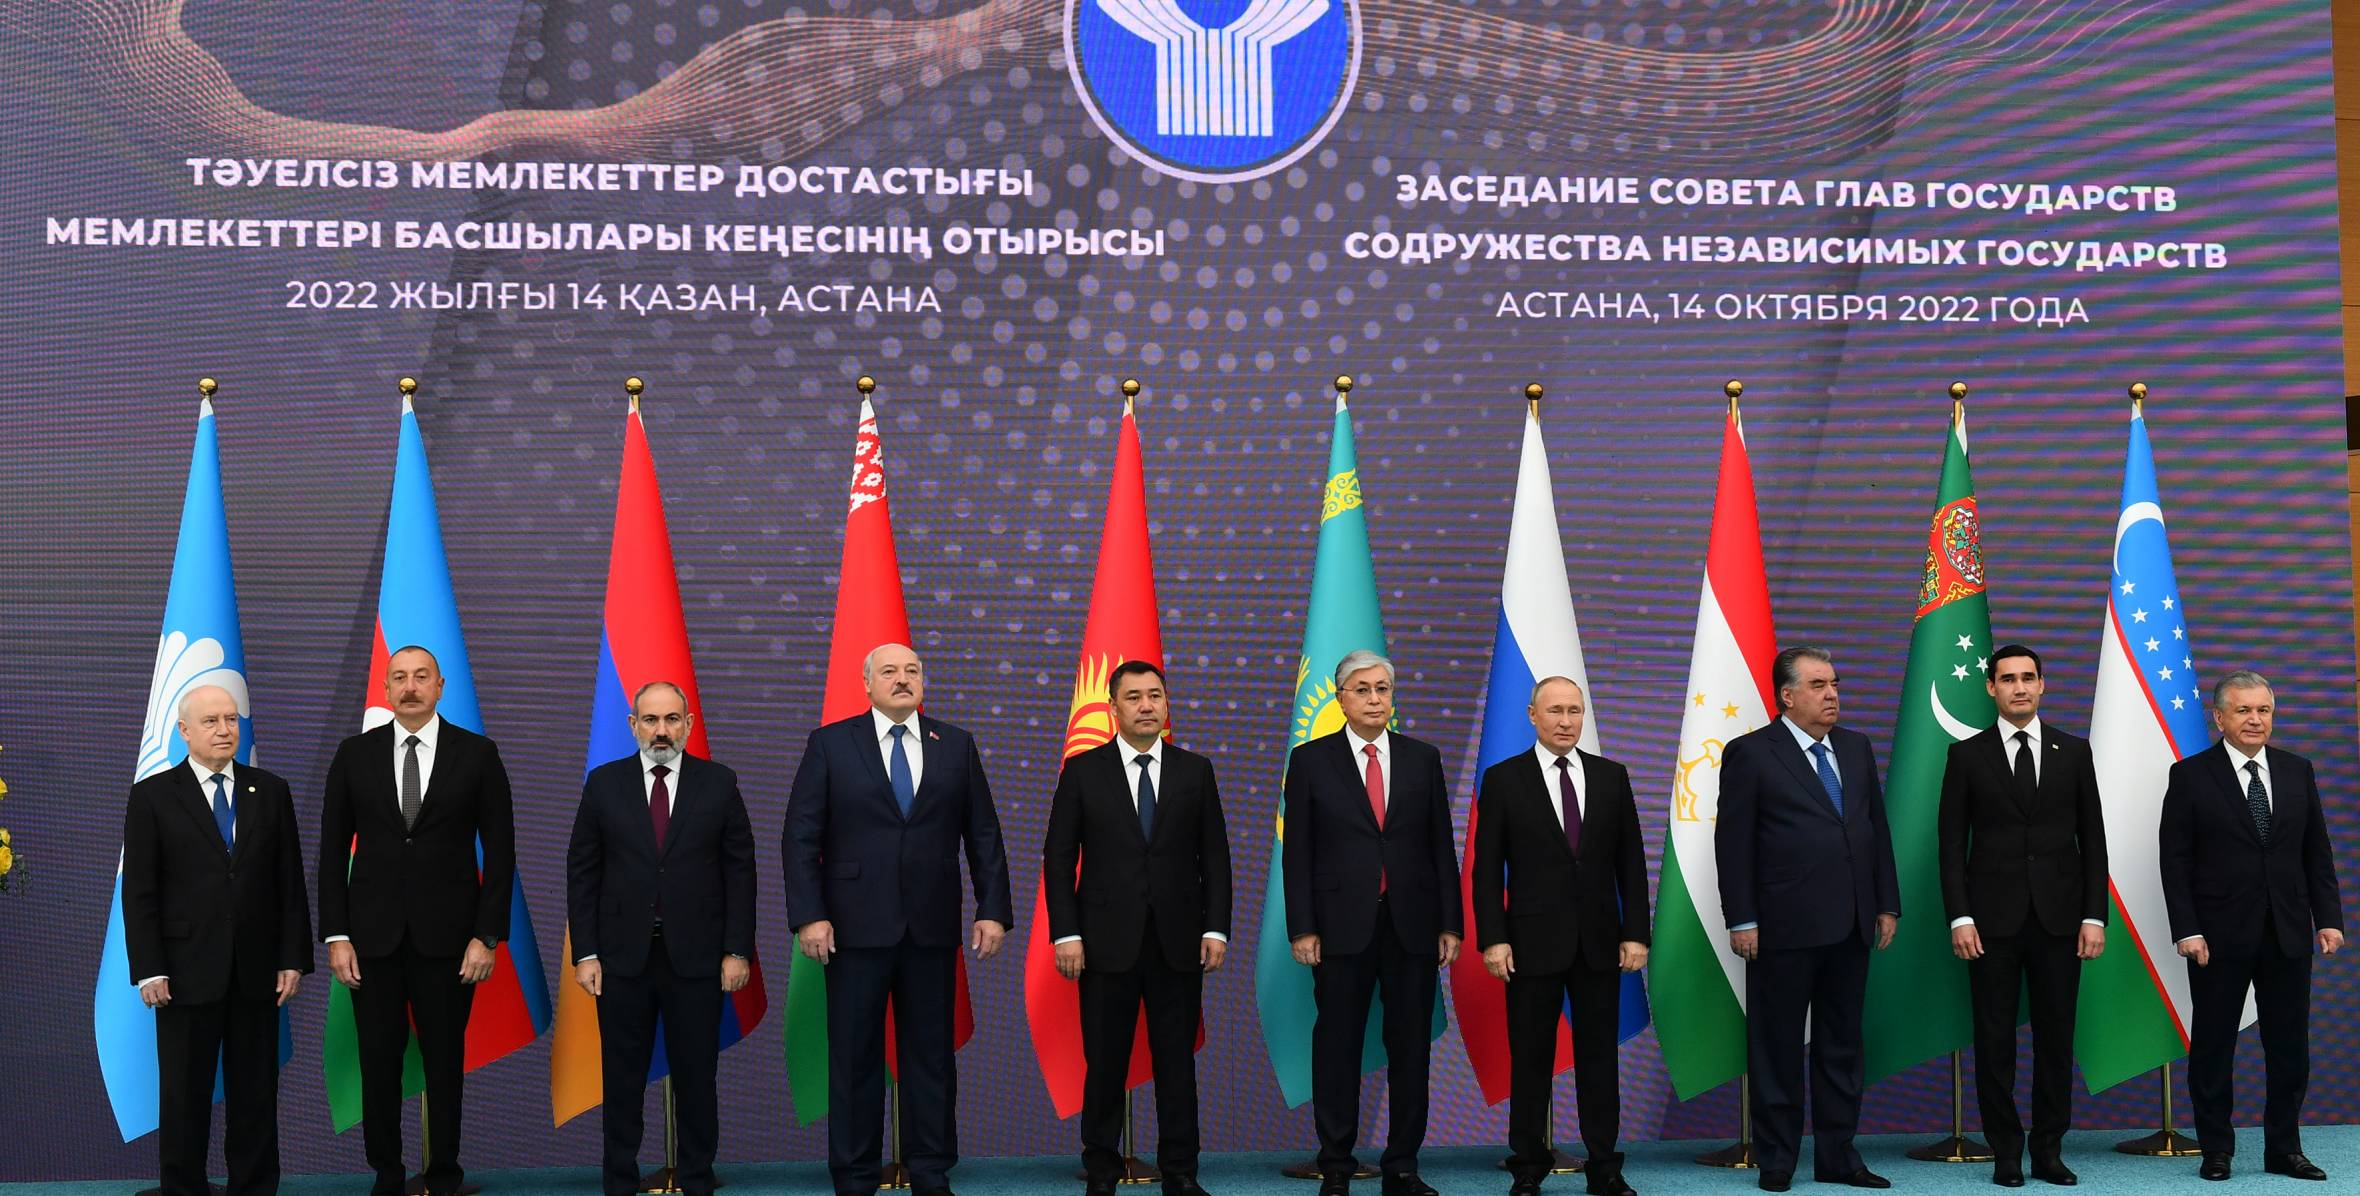 Ilham Aliyev attended the meeting of CIS's councils of heads of state in Astana